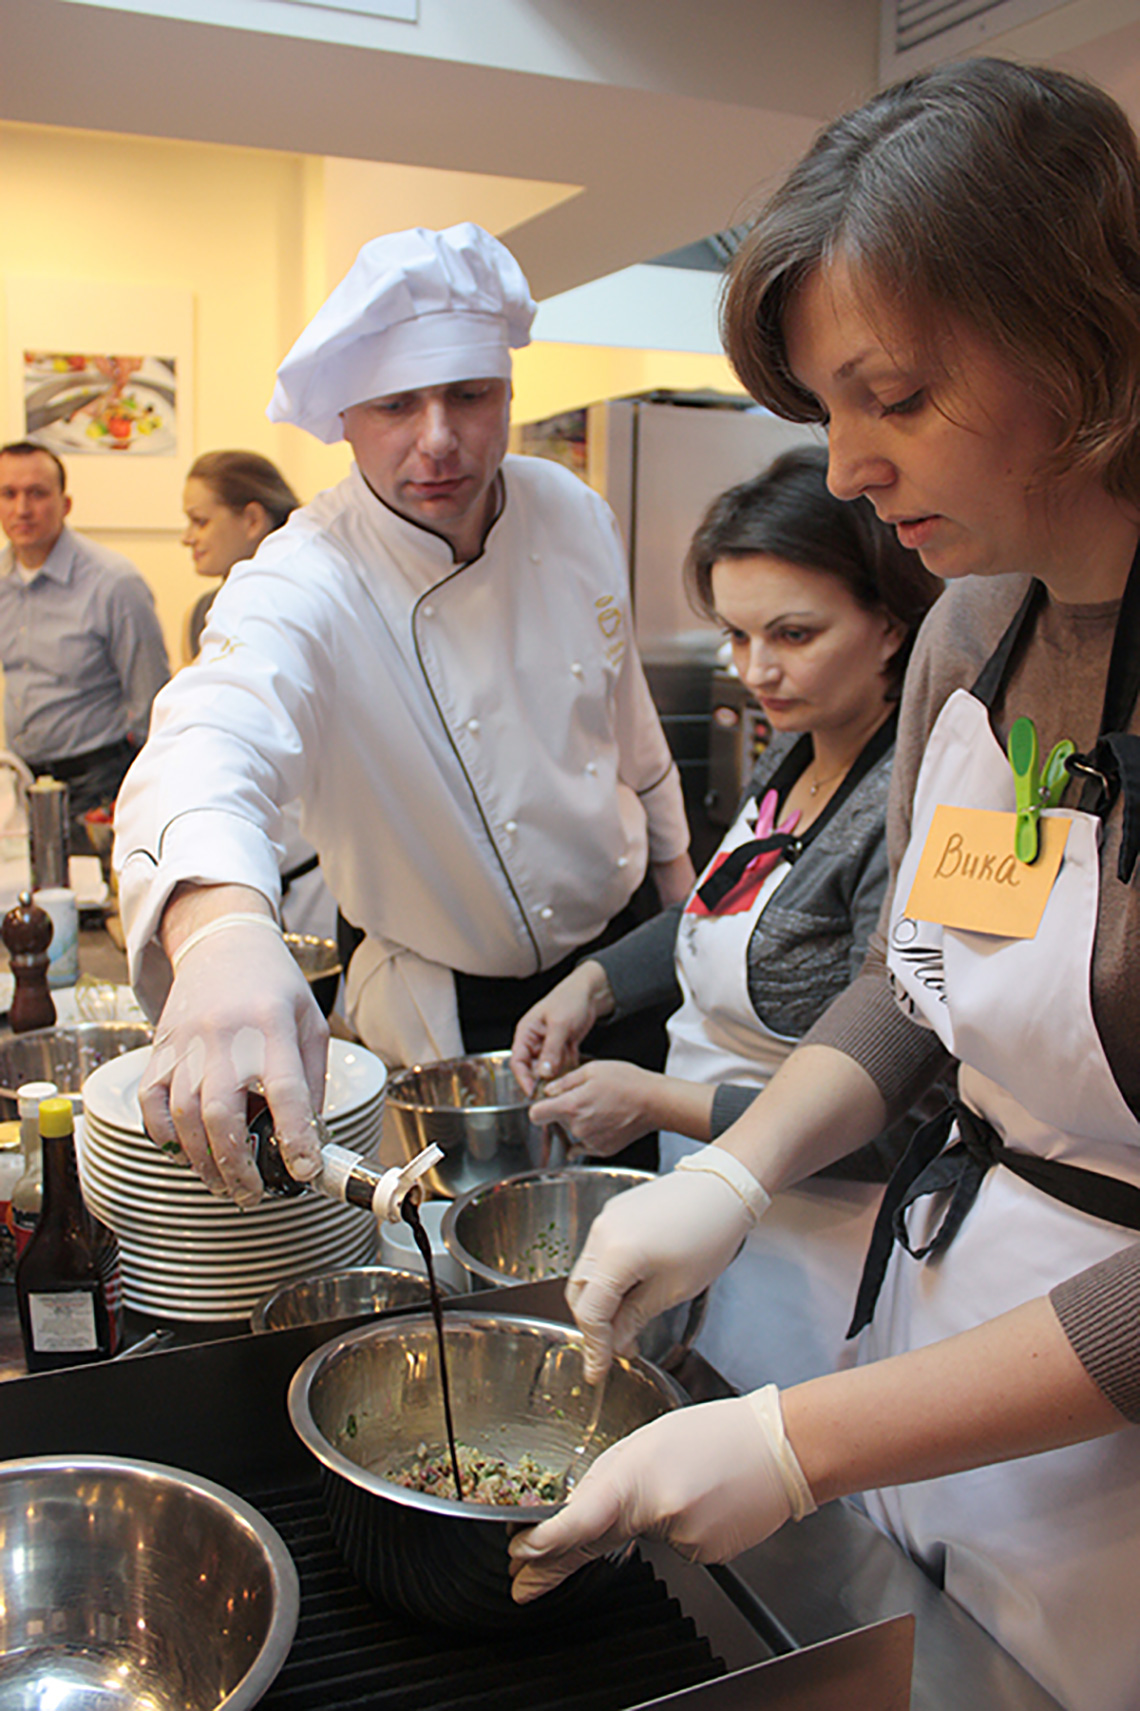 Course "Culinary Traditions of Northern Italy". Cooking school in Ukraine.